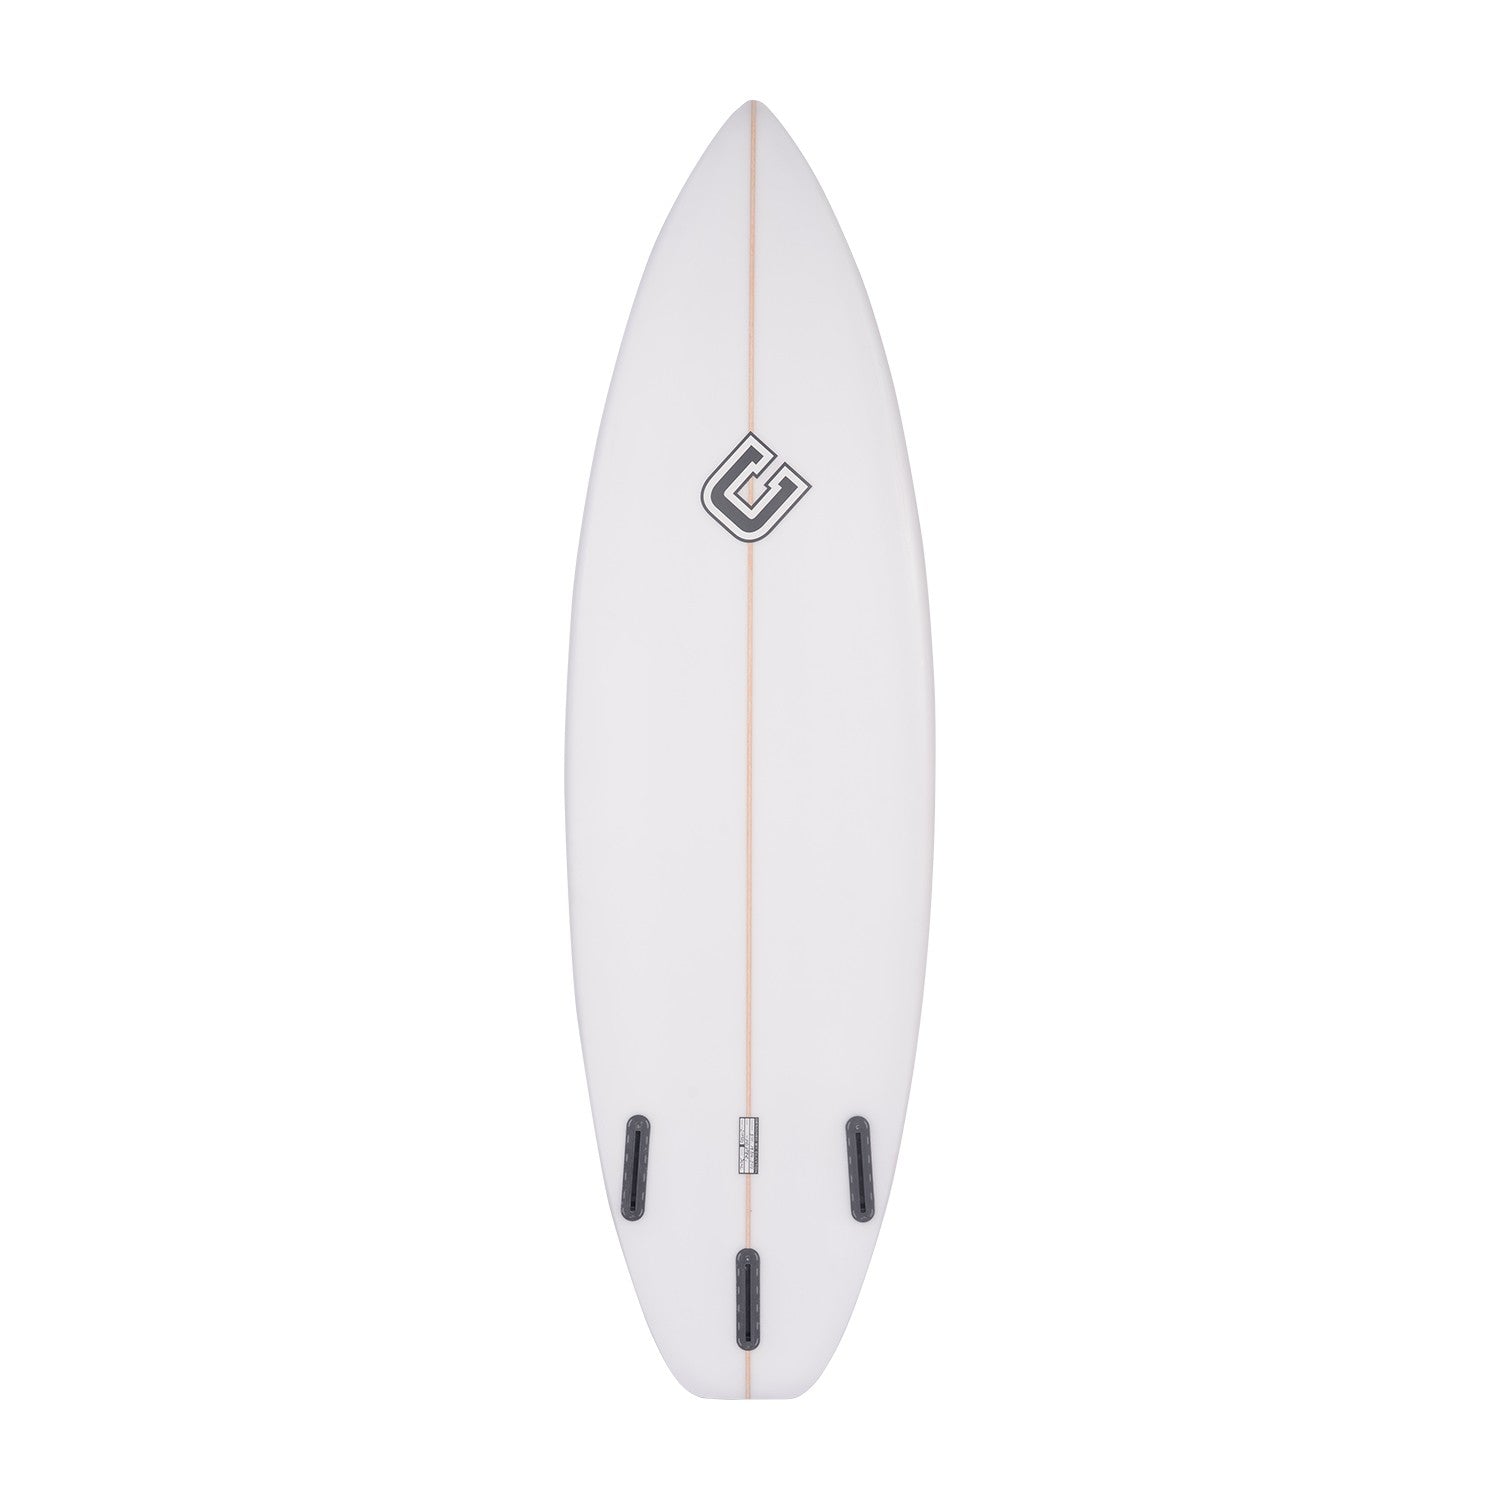 CLAYTON Surfboards - Trickster (PU) Futures - 5'8